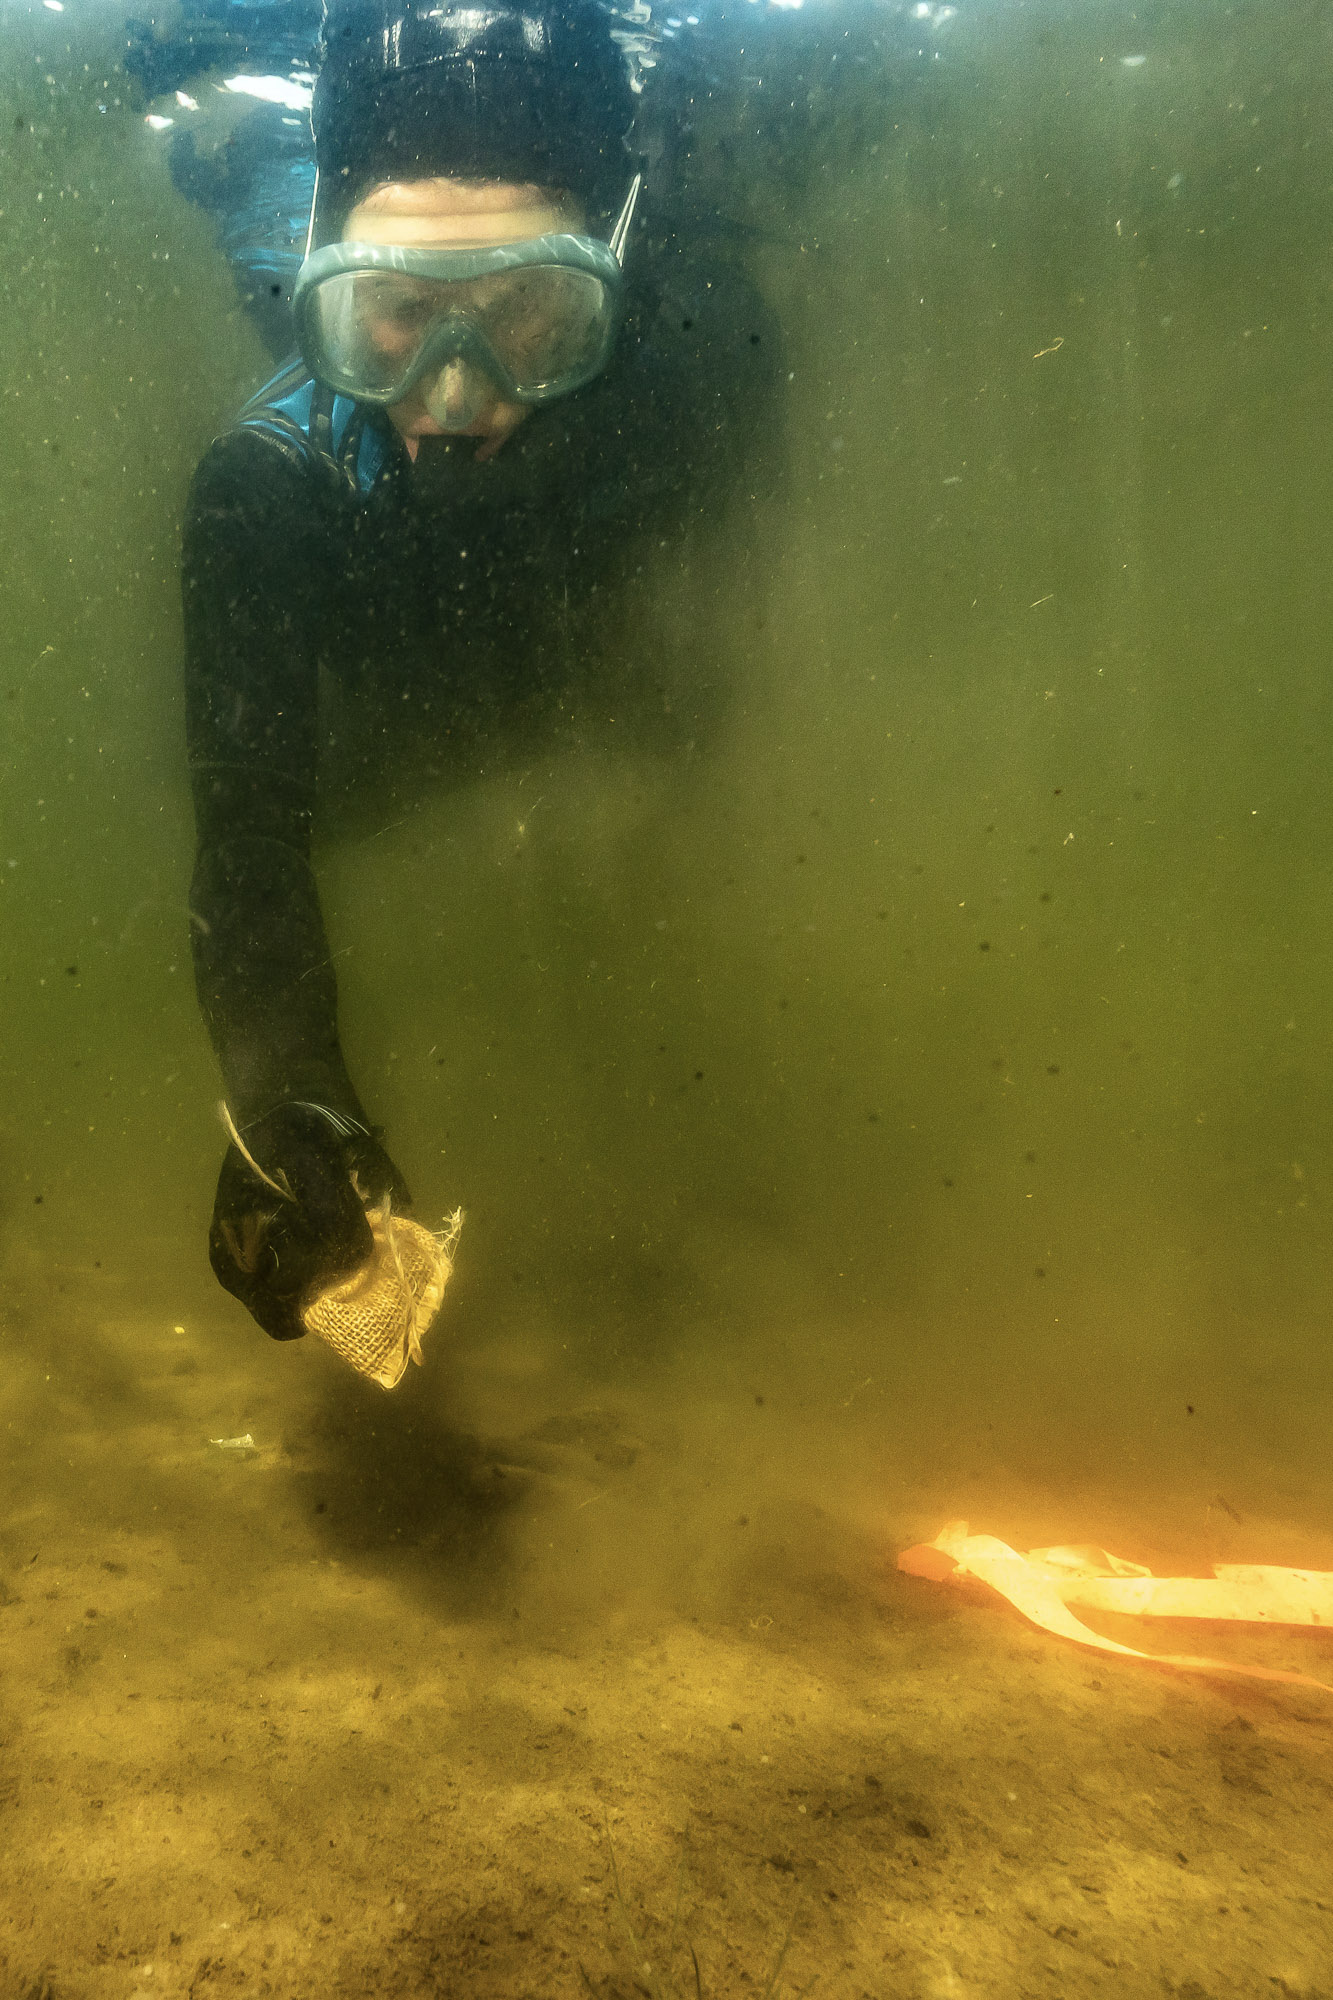 A person in a mask and breathing apparatus pushes a small burlap bag towards the ocean floor.